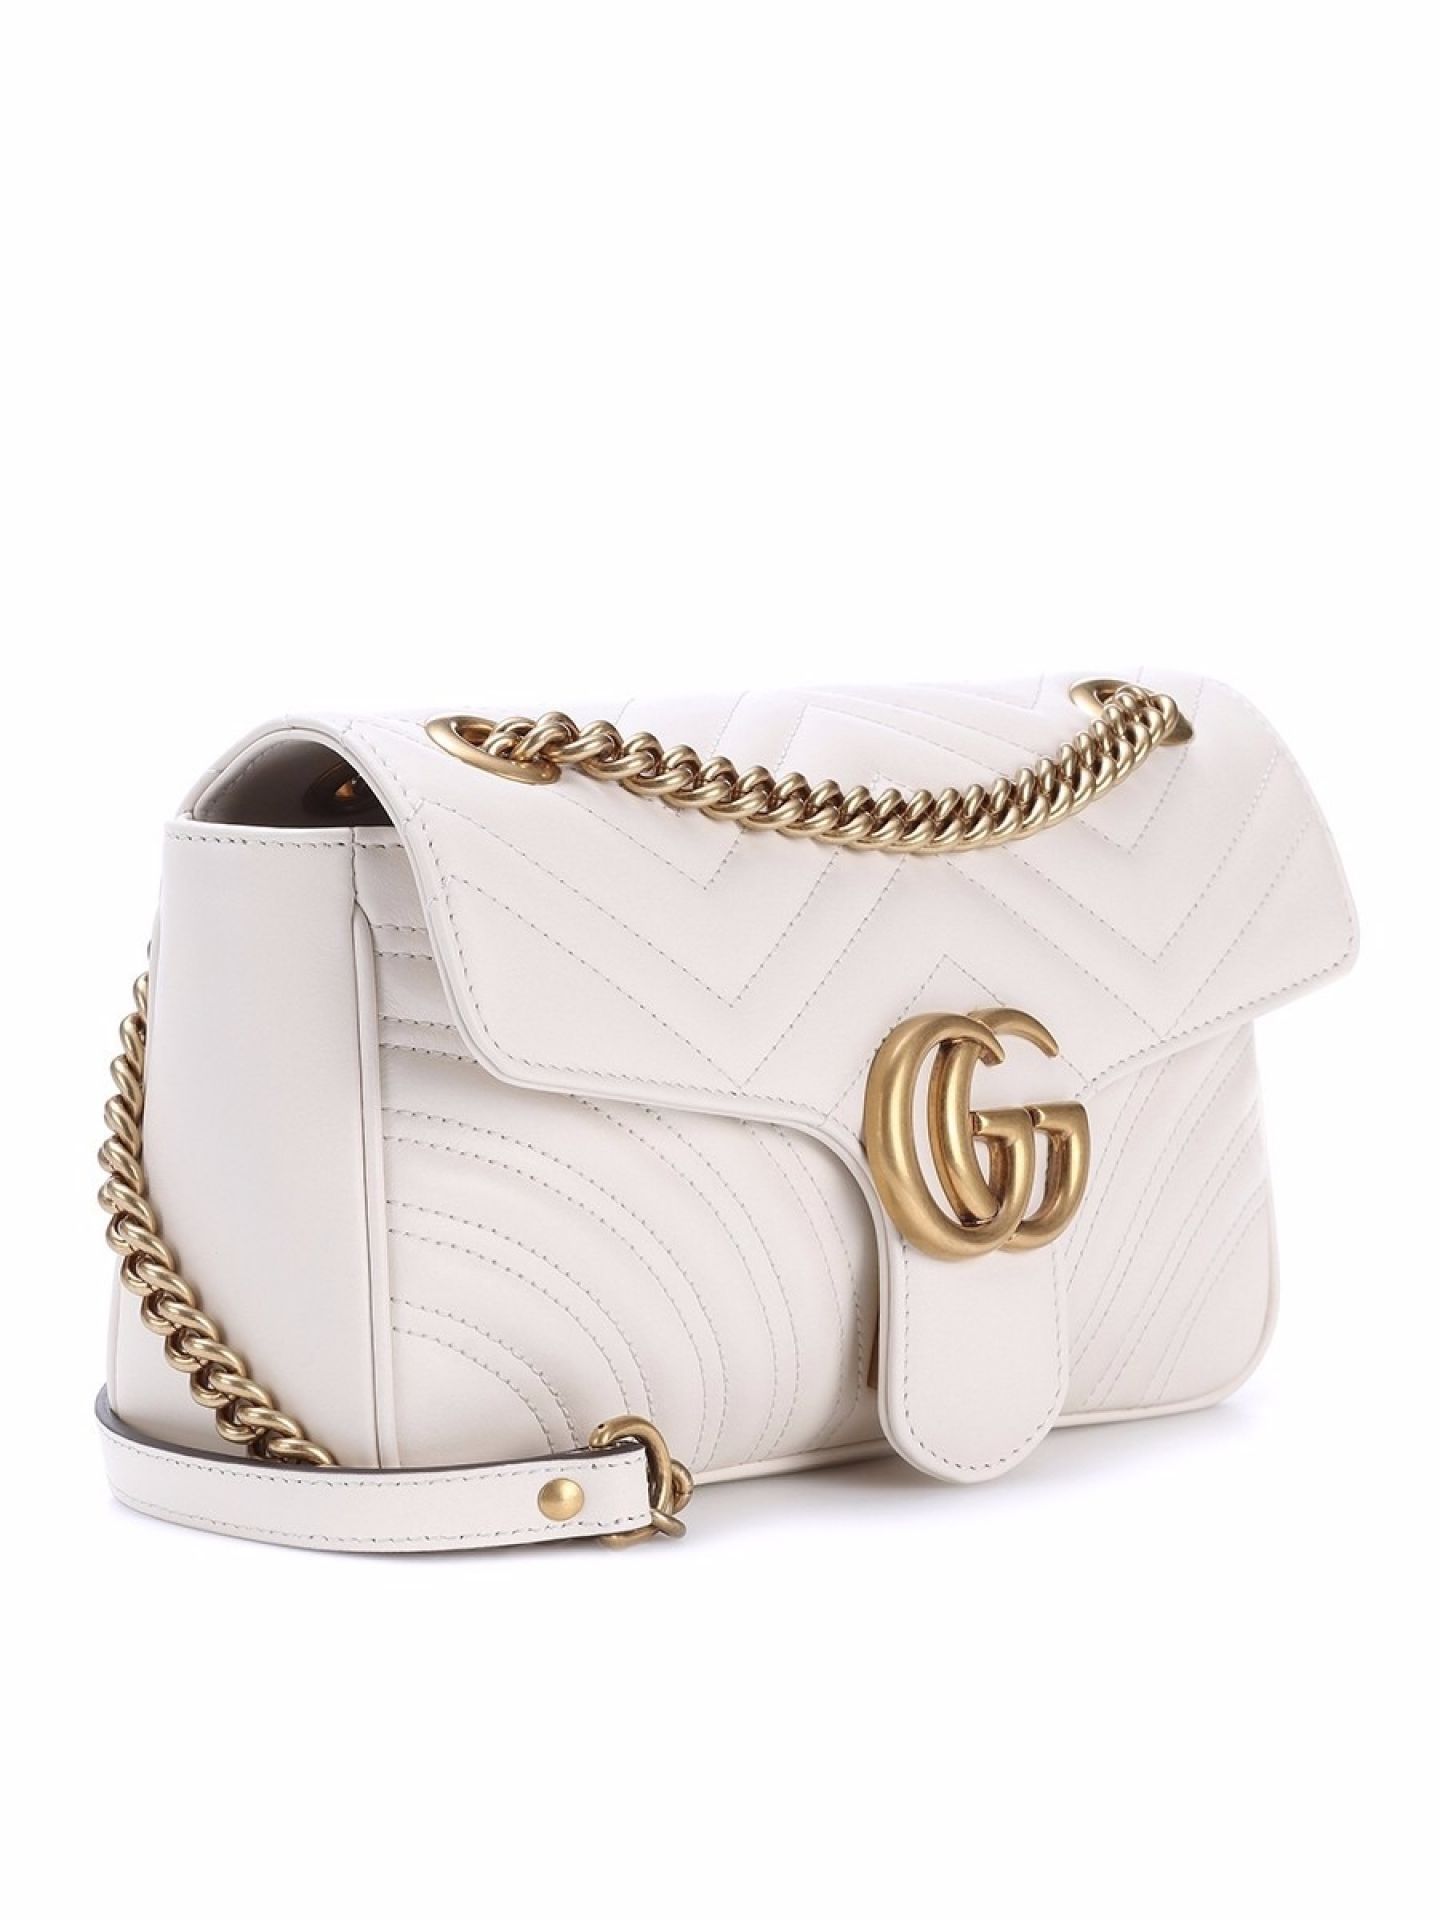 Gucci Marmont Small Shoulder Bag White | Confederated Tribes of the Umatilla Indian Reservation